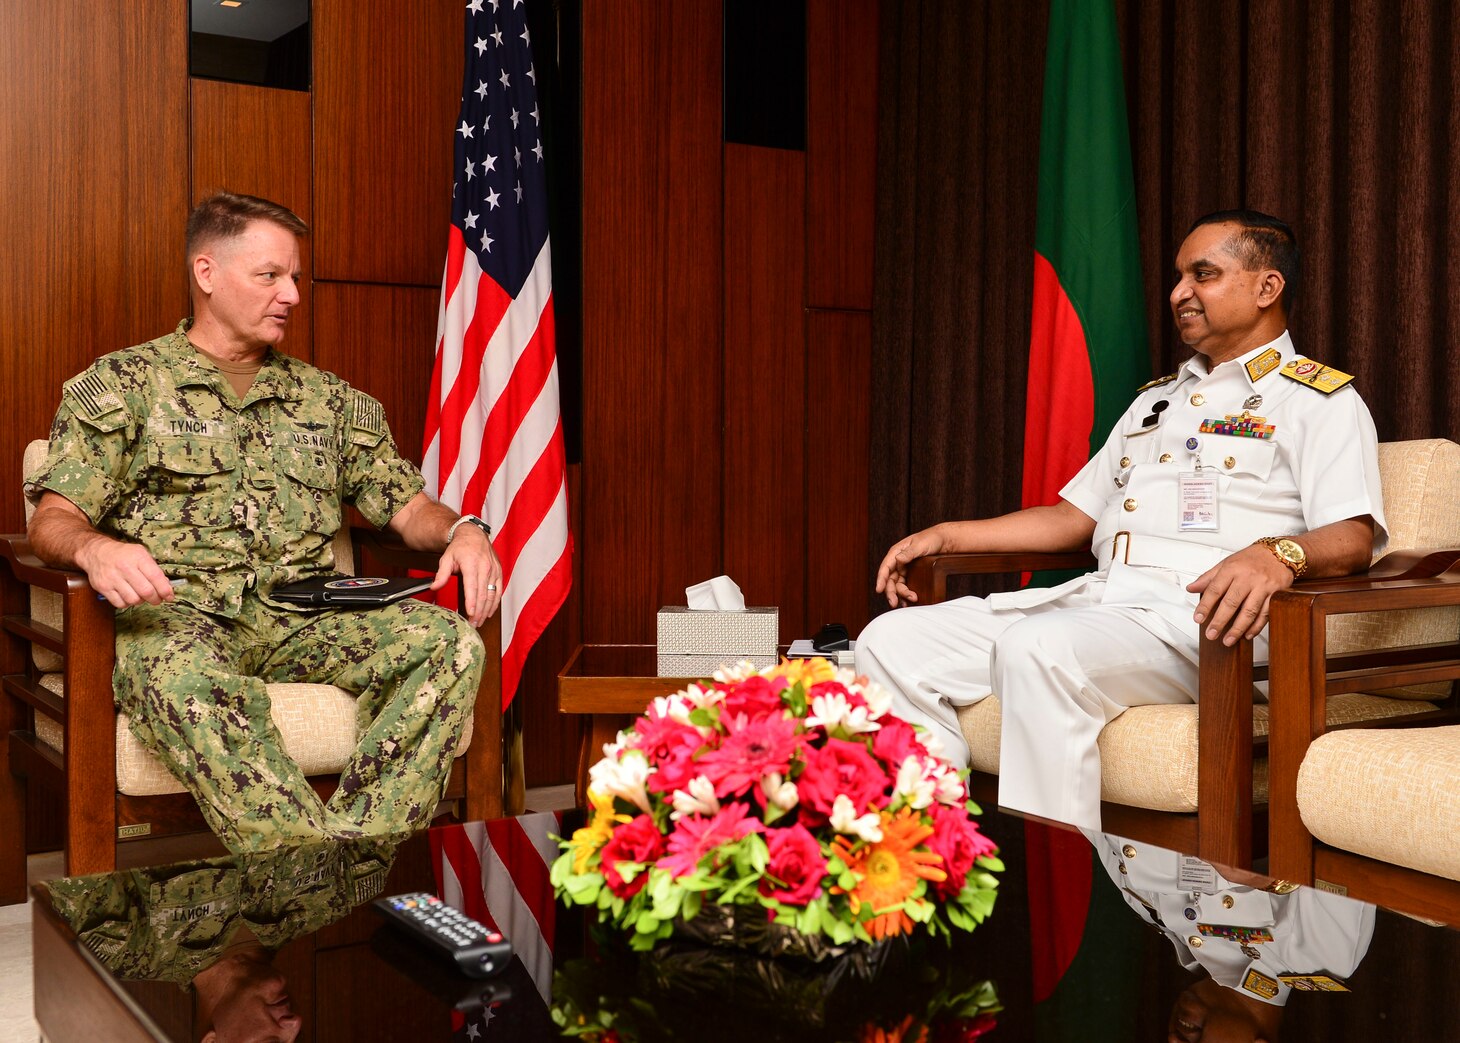 Chattogram, Bangladesh (Nov. 4, 2019) U.S. Navy Rear Adm. Joey Tynch, commander, Logistics Group Western Pacific, speaks with Rear Adm. M Makbul Hossain NBP, OSP, BCGMS, ndu, psc, Assistant Chief of Naval Staff Operations, during an office call in support of Cooperation Afloat Readiness and Training (CARAT) Bangladesh 2019. This year marks the 25th iteration of CARAT, a multinational exercise designed to enhance U.S. and partner navies' abilities to operate together in response to traditional and non-traditional maritime security challenges in the Indo-Pacific region.